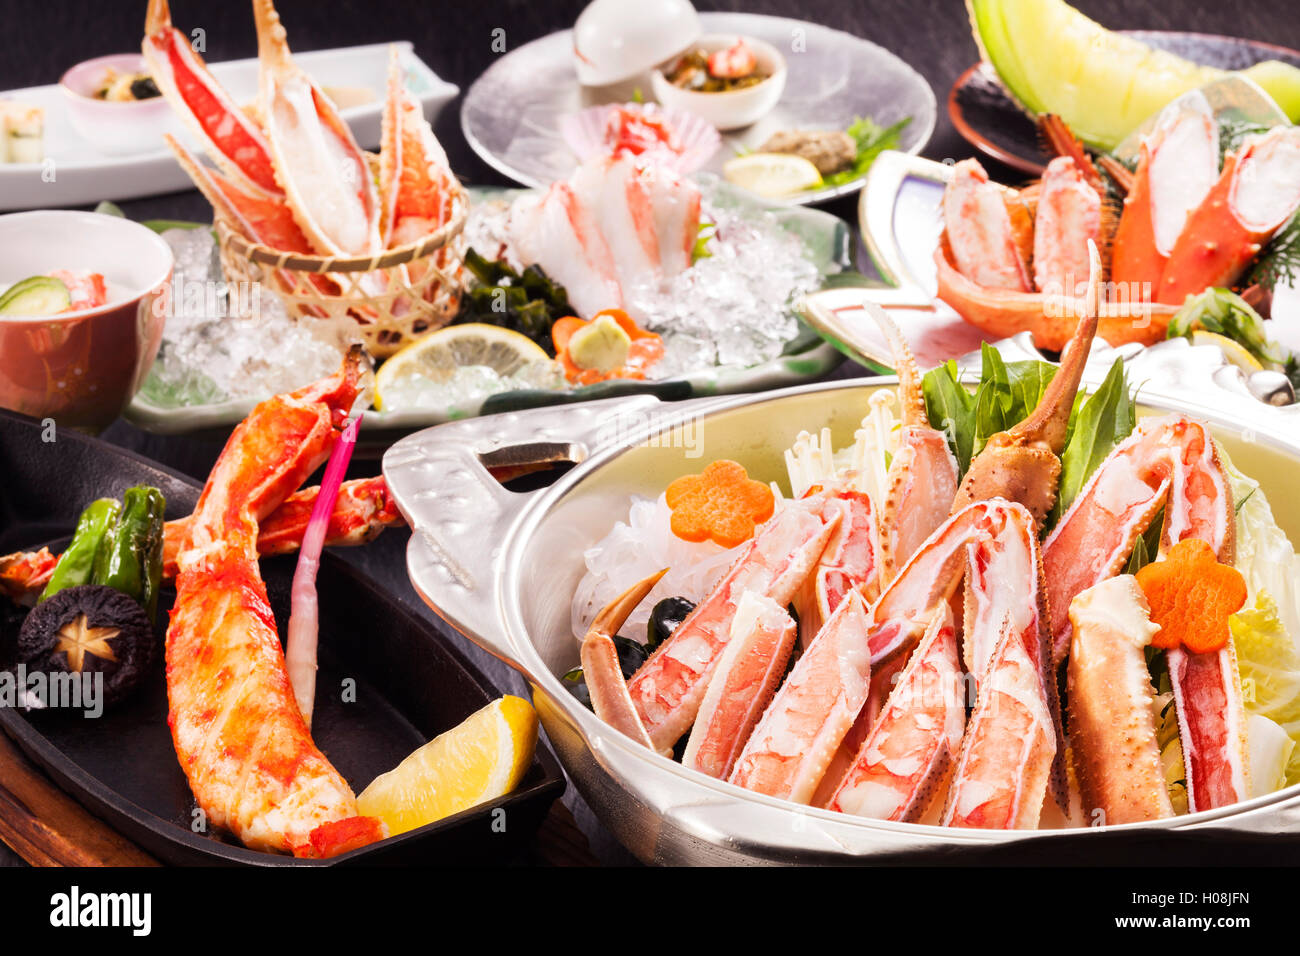 Tray food of crab and seafood on the table Stock Photo